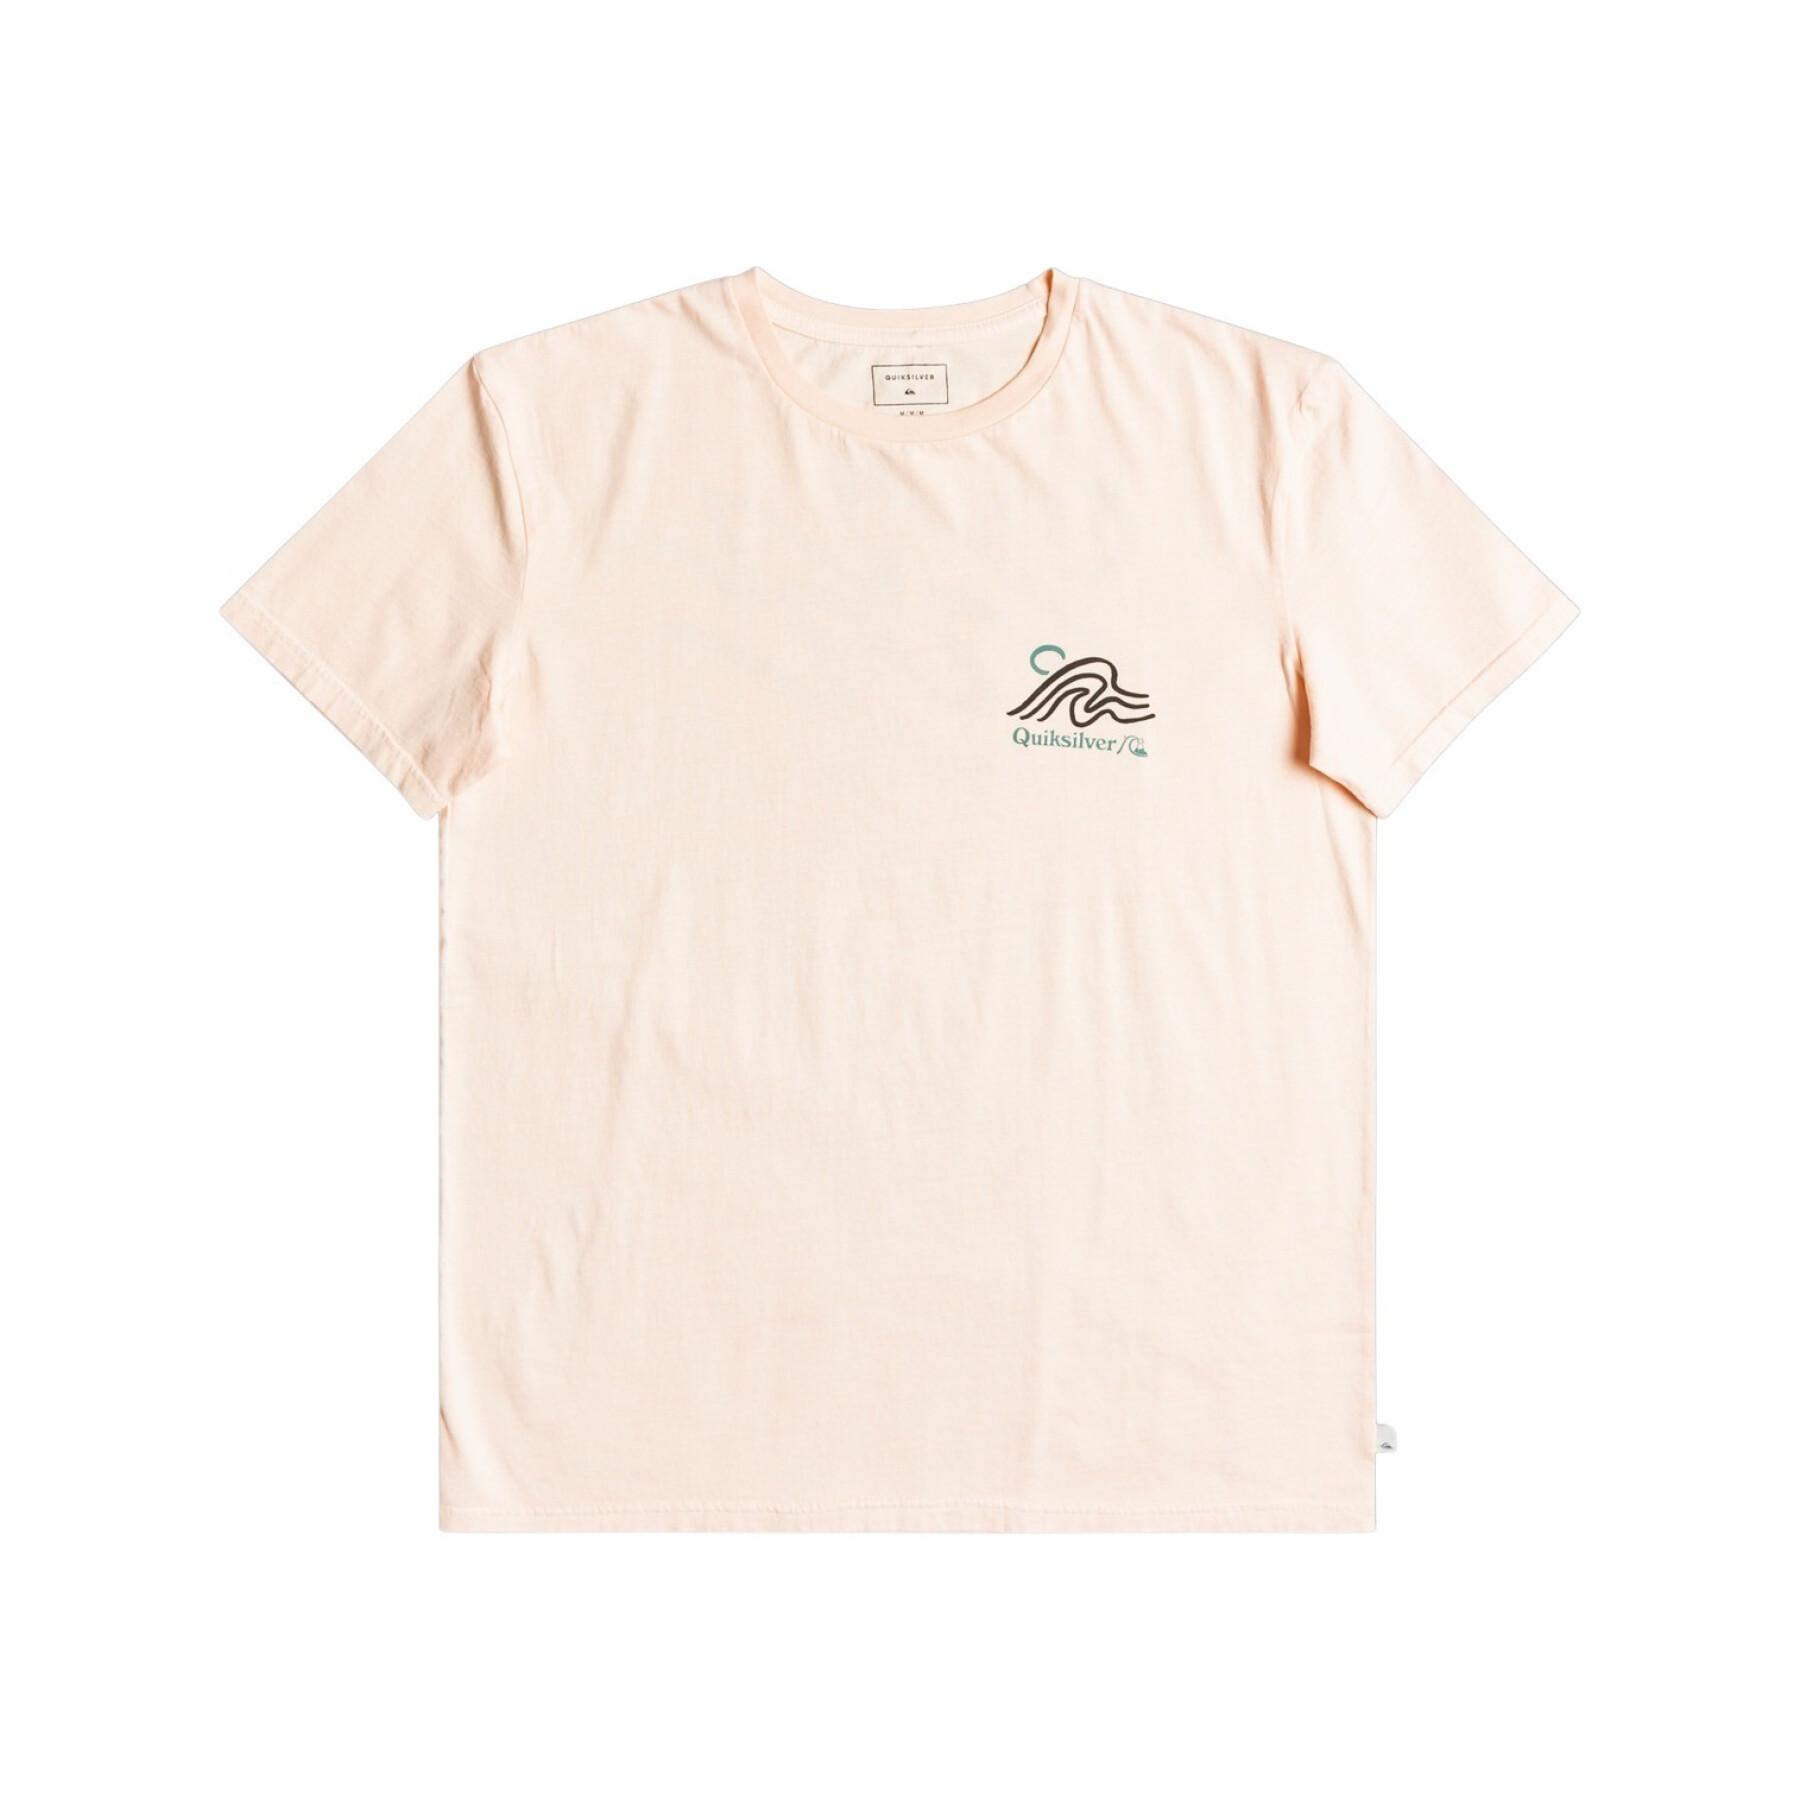 T-shirt Quiksilver Slow Mover